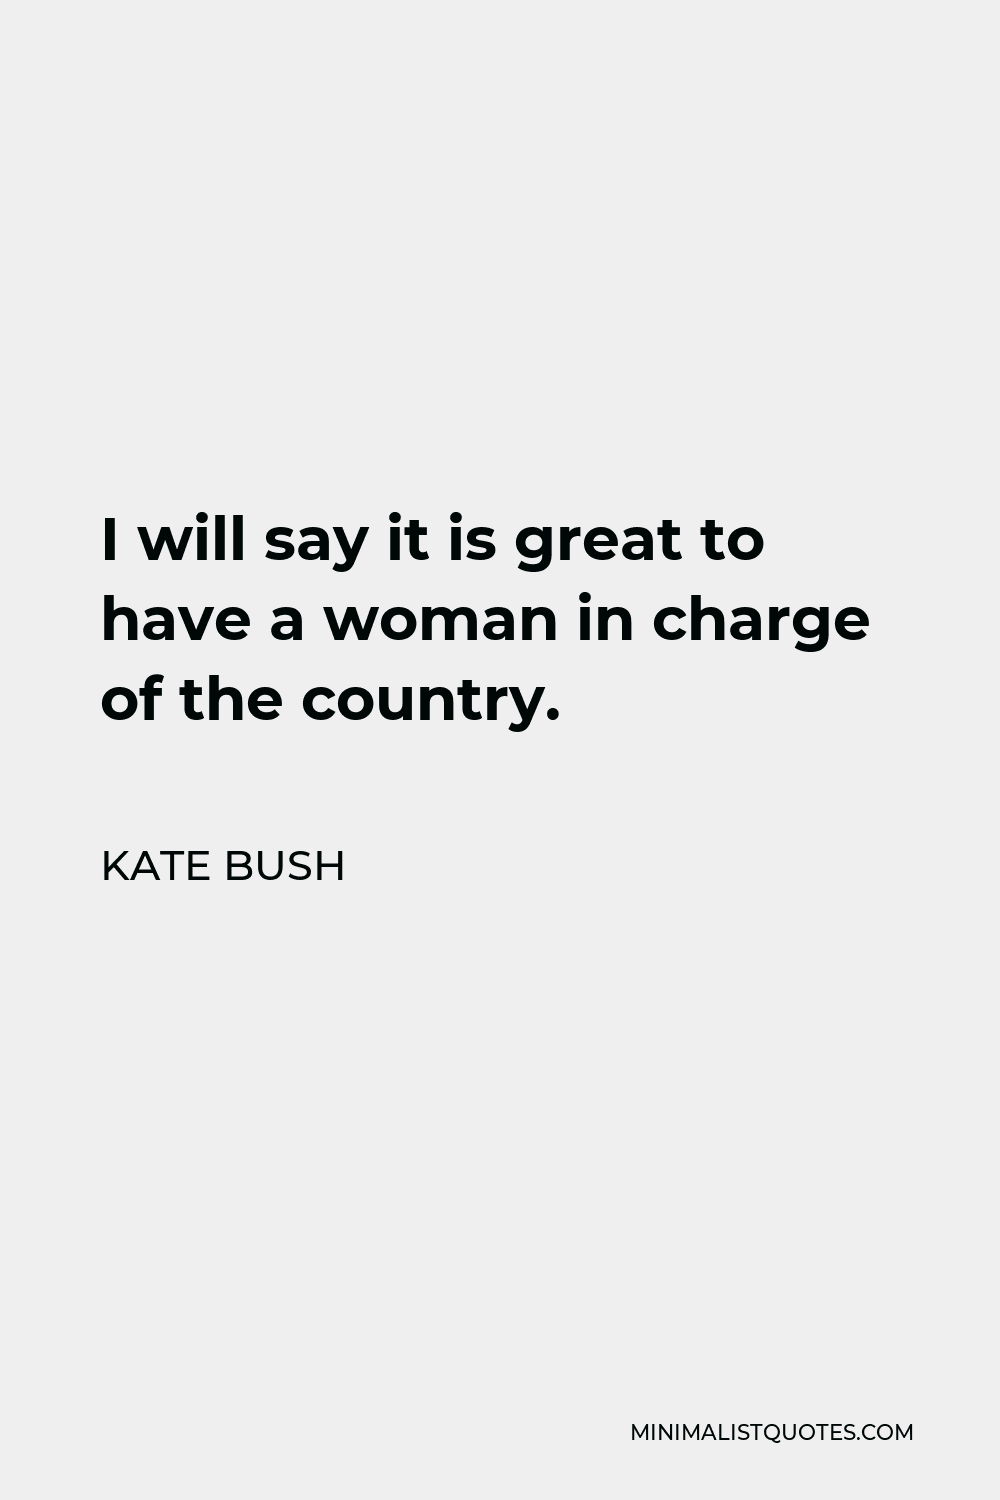 Kate Bush Quote I Will Say It Is Great To Have A Woman In Charge Of The Country